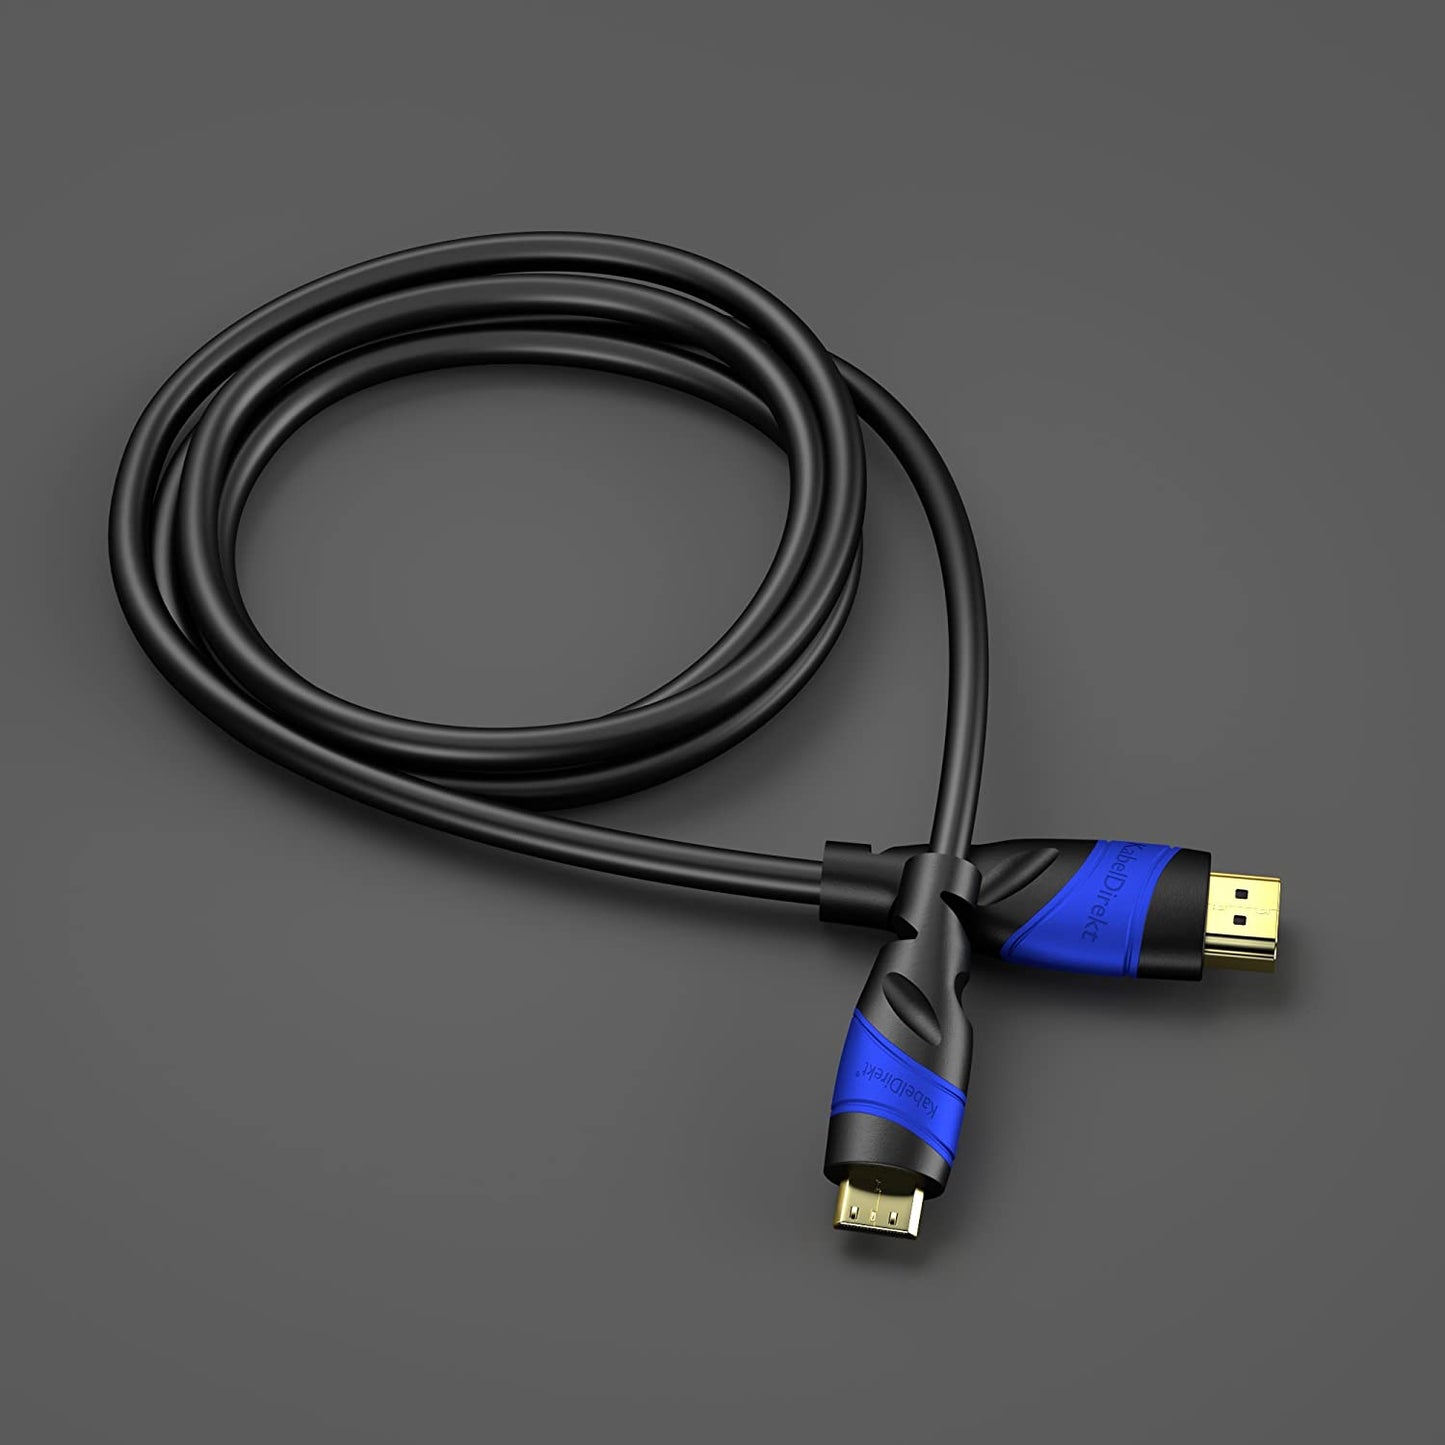 Mini HDMI cable - adapter cable HDMI 2.0 with 4K, 4K@60HZ, 1080p FullHD, UHD, 3D, Ethernet, ARC